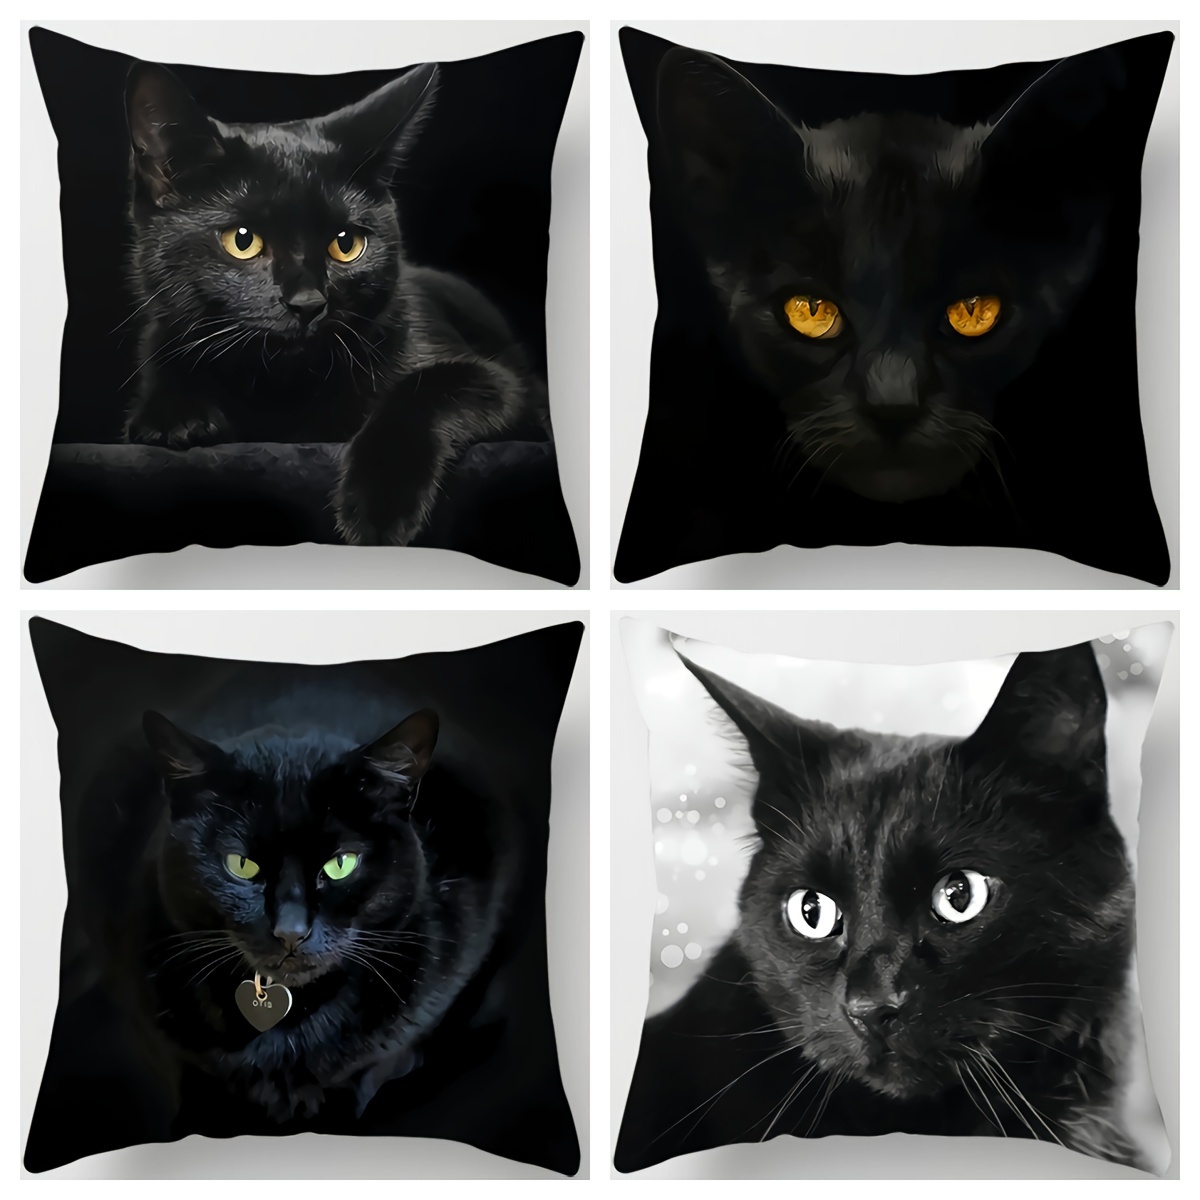 

4pcs, Cute Black Kitty Head Pillowcase, Home, In-vehicle, Bedroom, Living Room More! 17.7inchx17.7inch Without Pillow Core, Single-sided Print Home Decoration